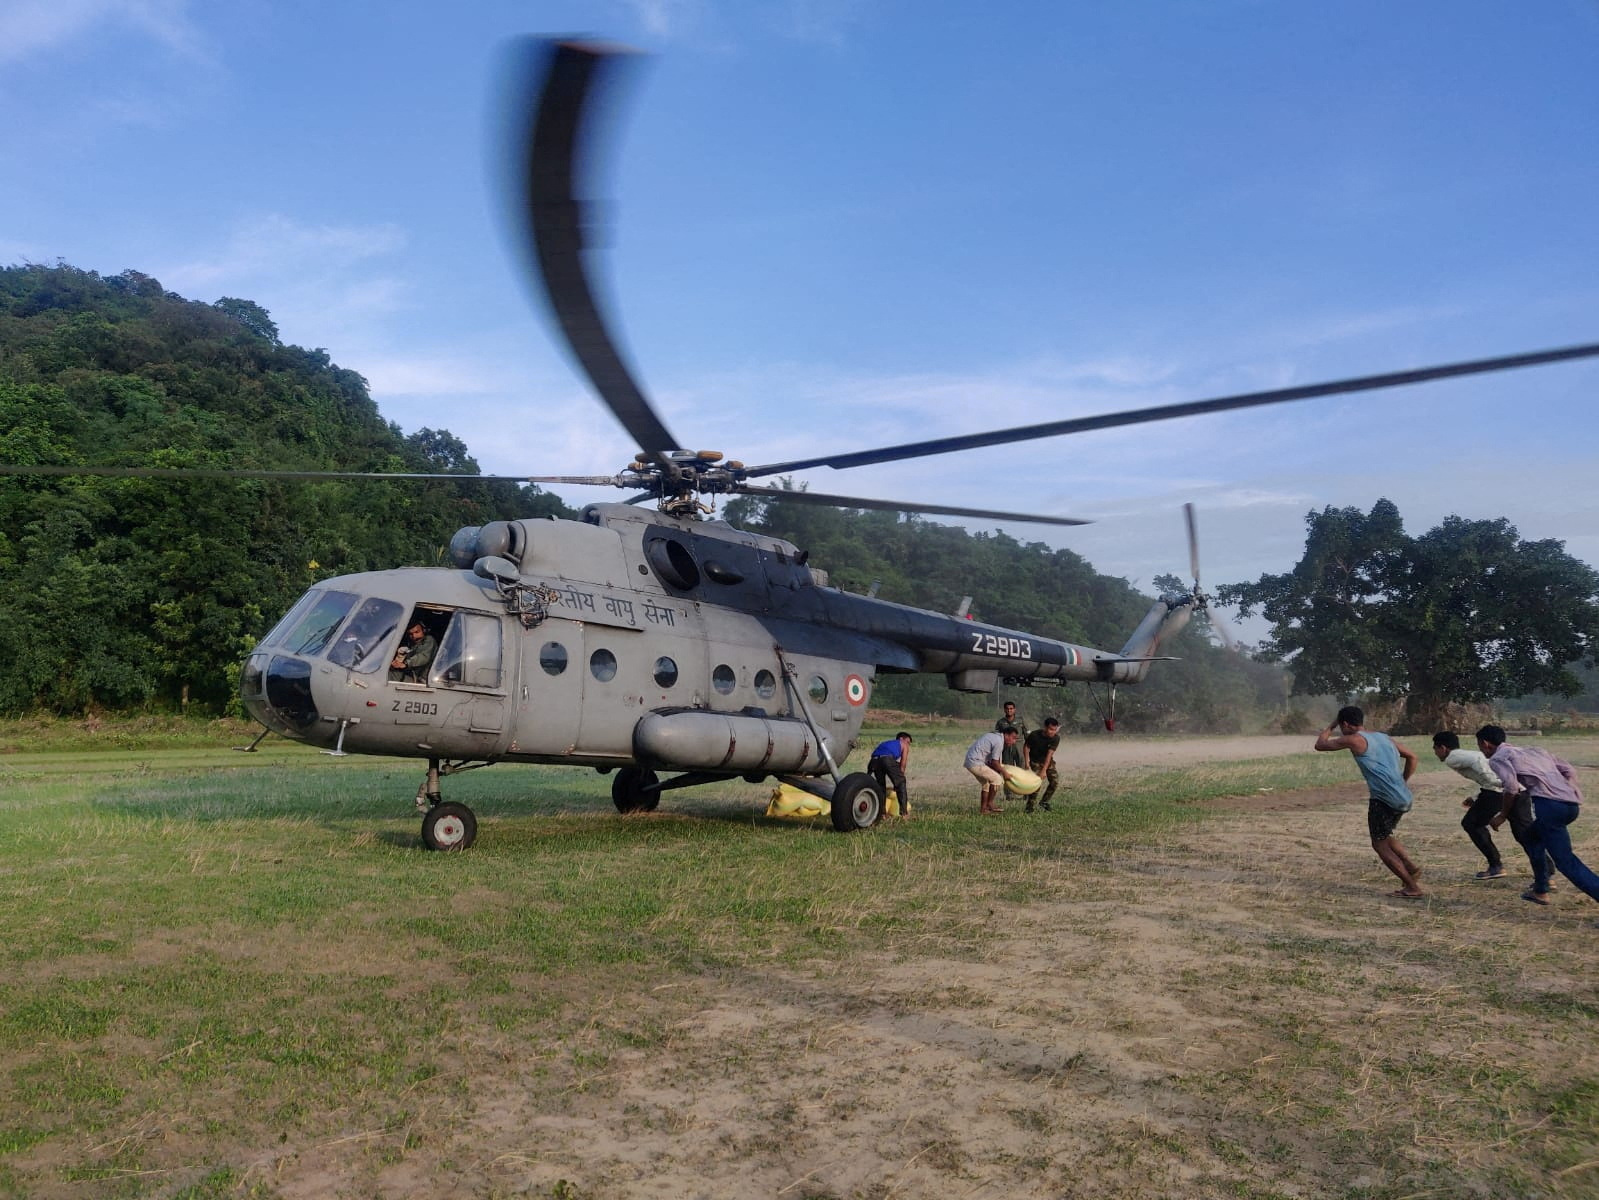 Men unload relief goods from an Indian Air Force helicopter to distribute it among the flood-affected people in the northeastern state of Meghalaya